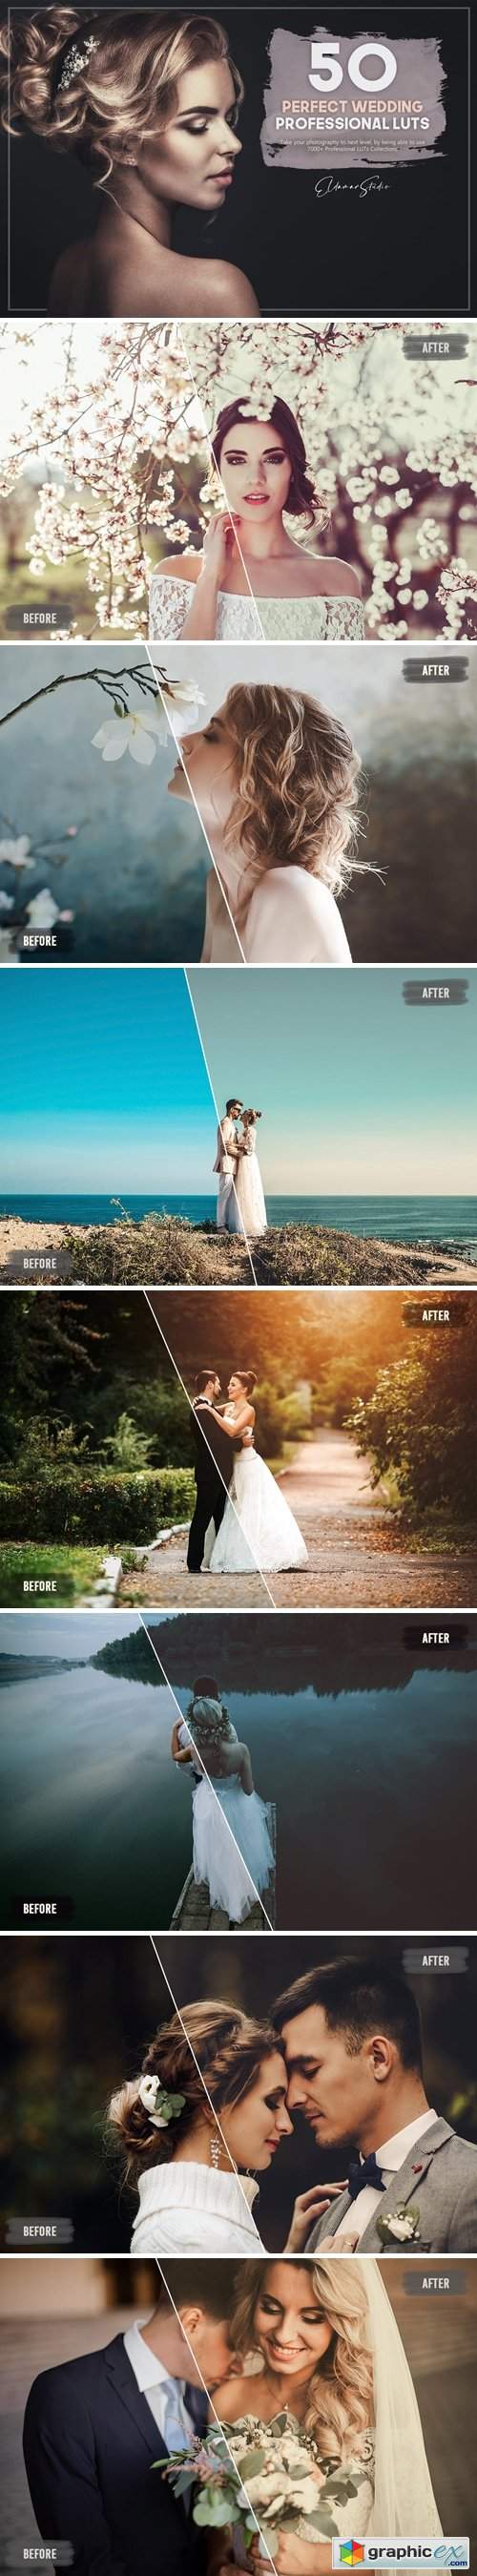  50 Perfect Wedding LUTs Pack 